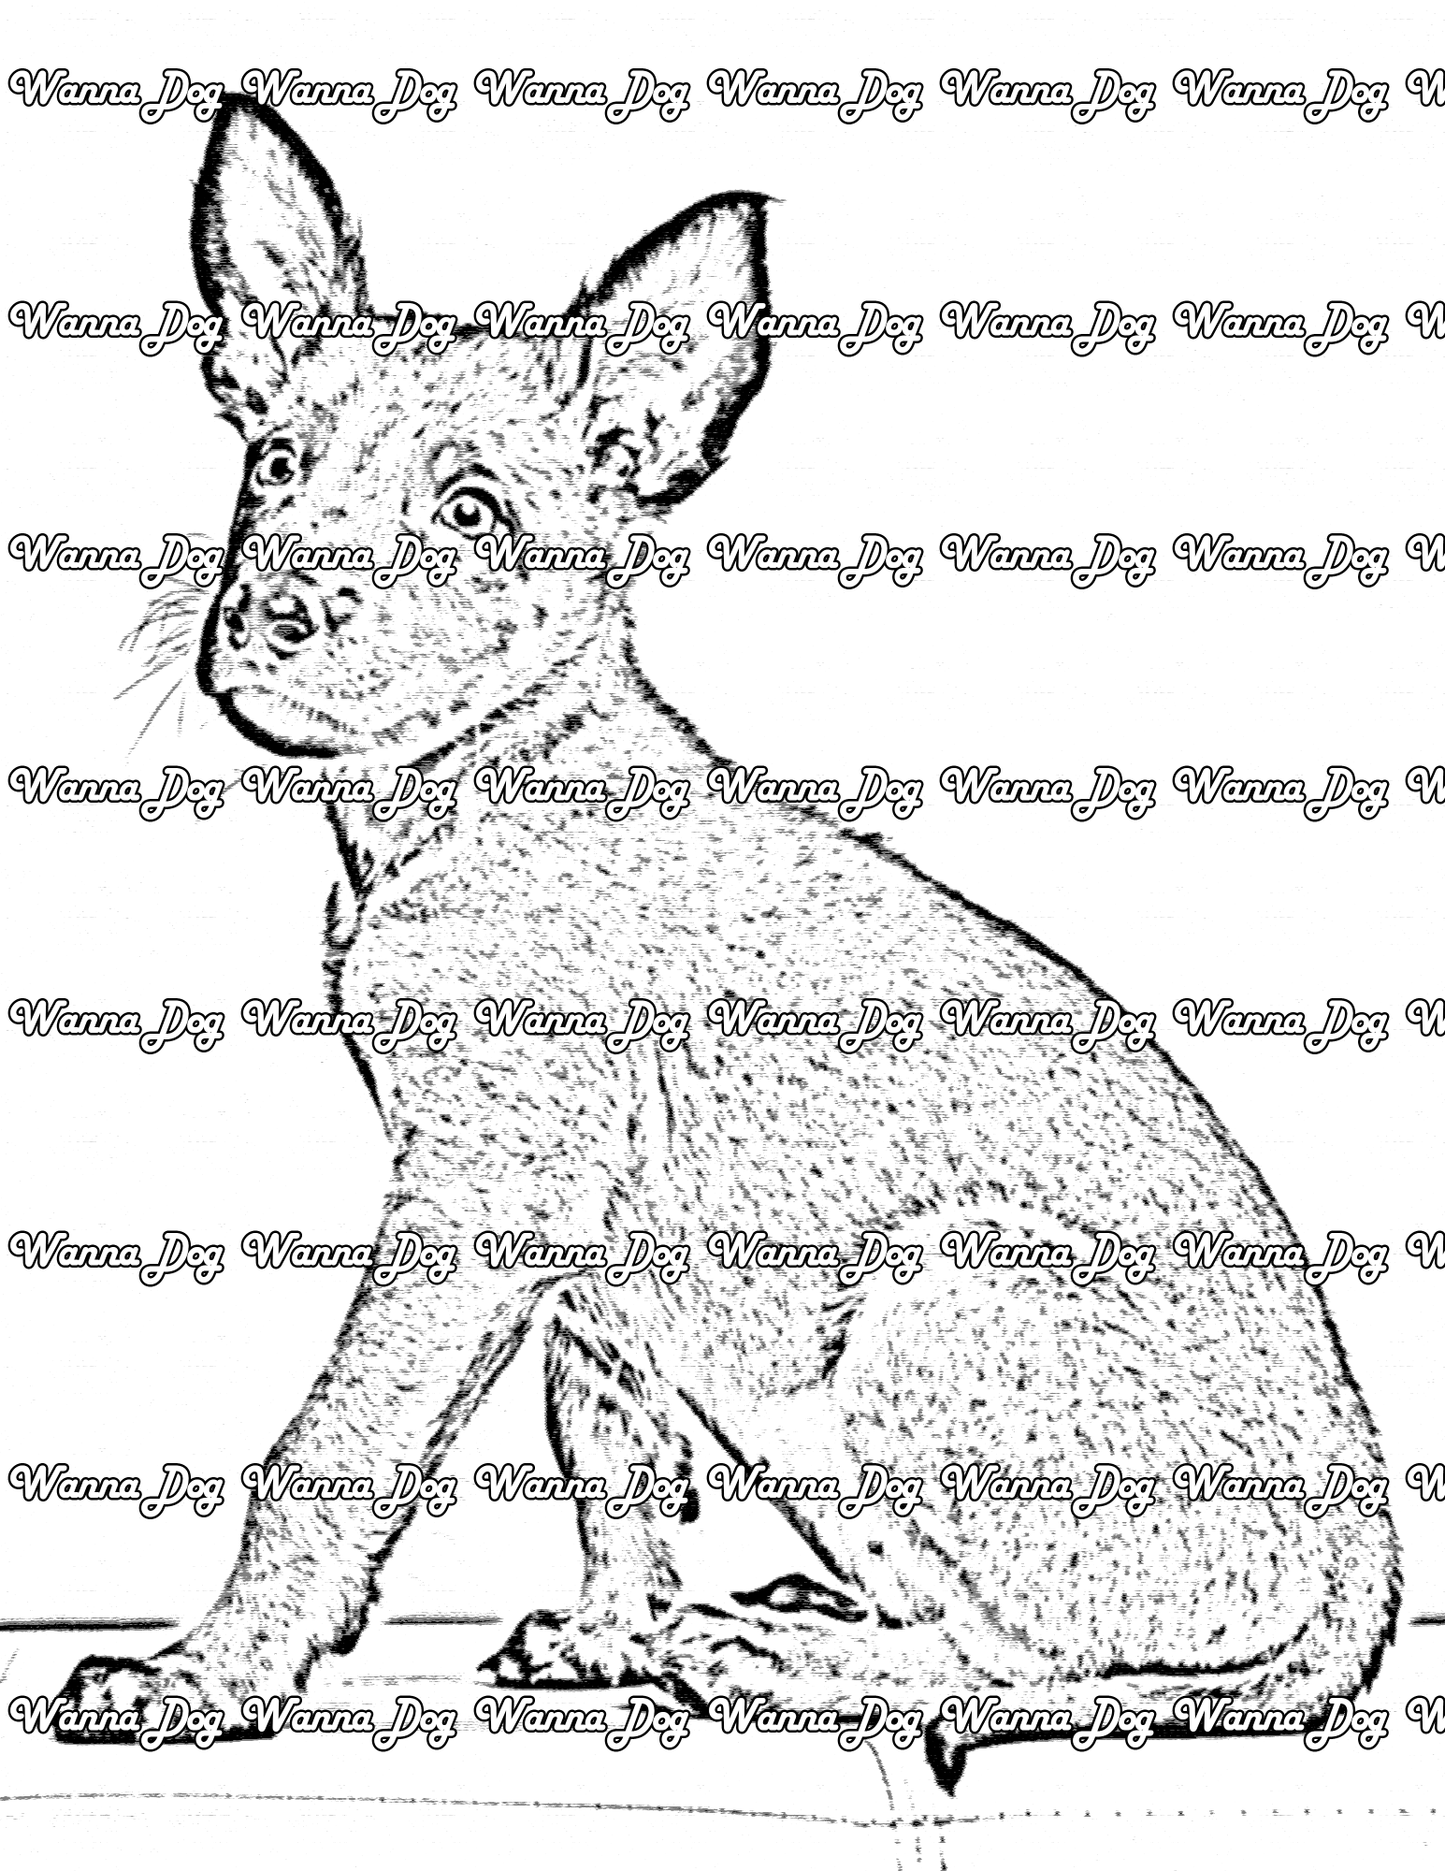 Belgian Malinois Coloring Page of a Belgian Malinois puppy sitting